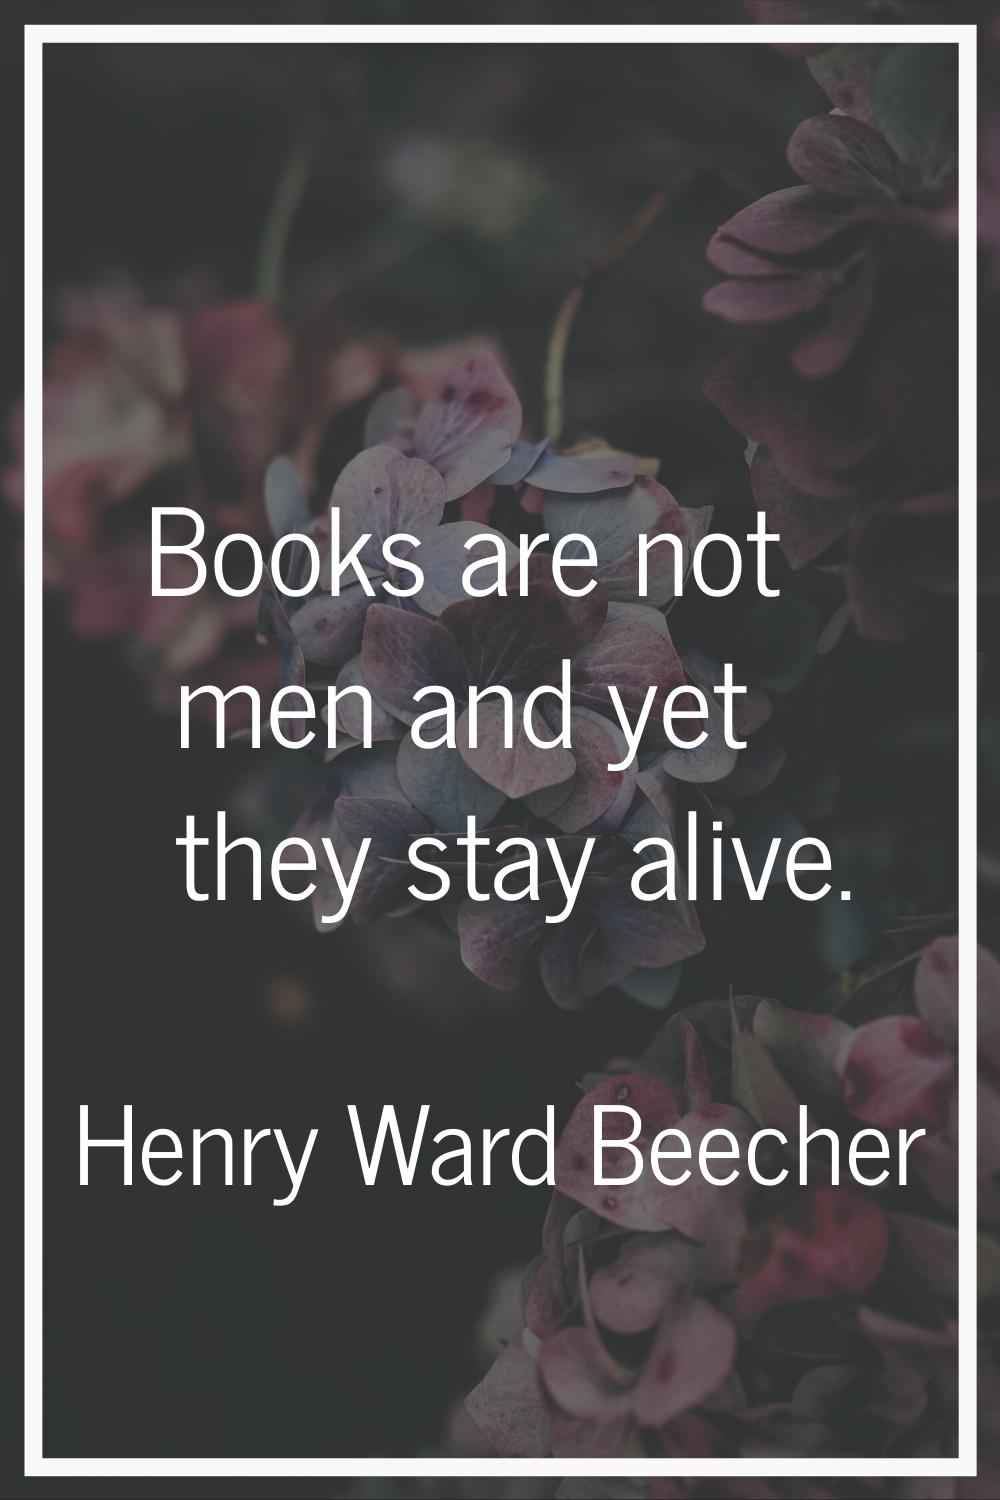 Books are not men and yet they stay alive.